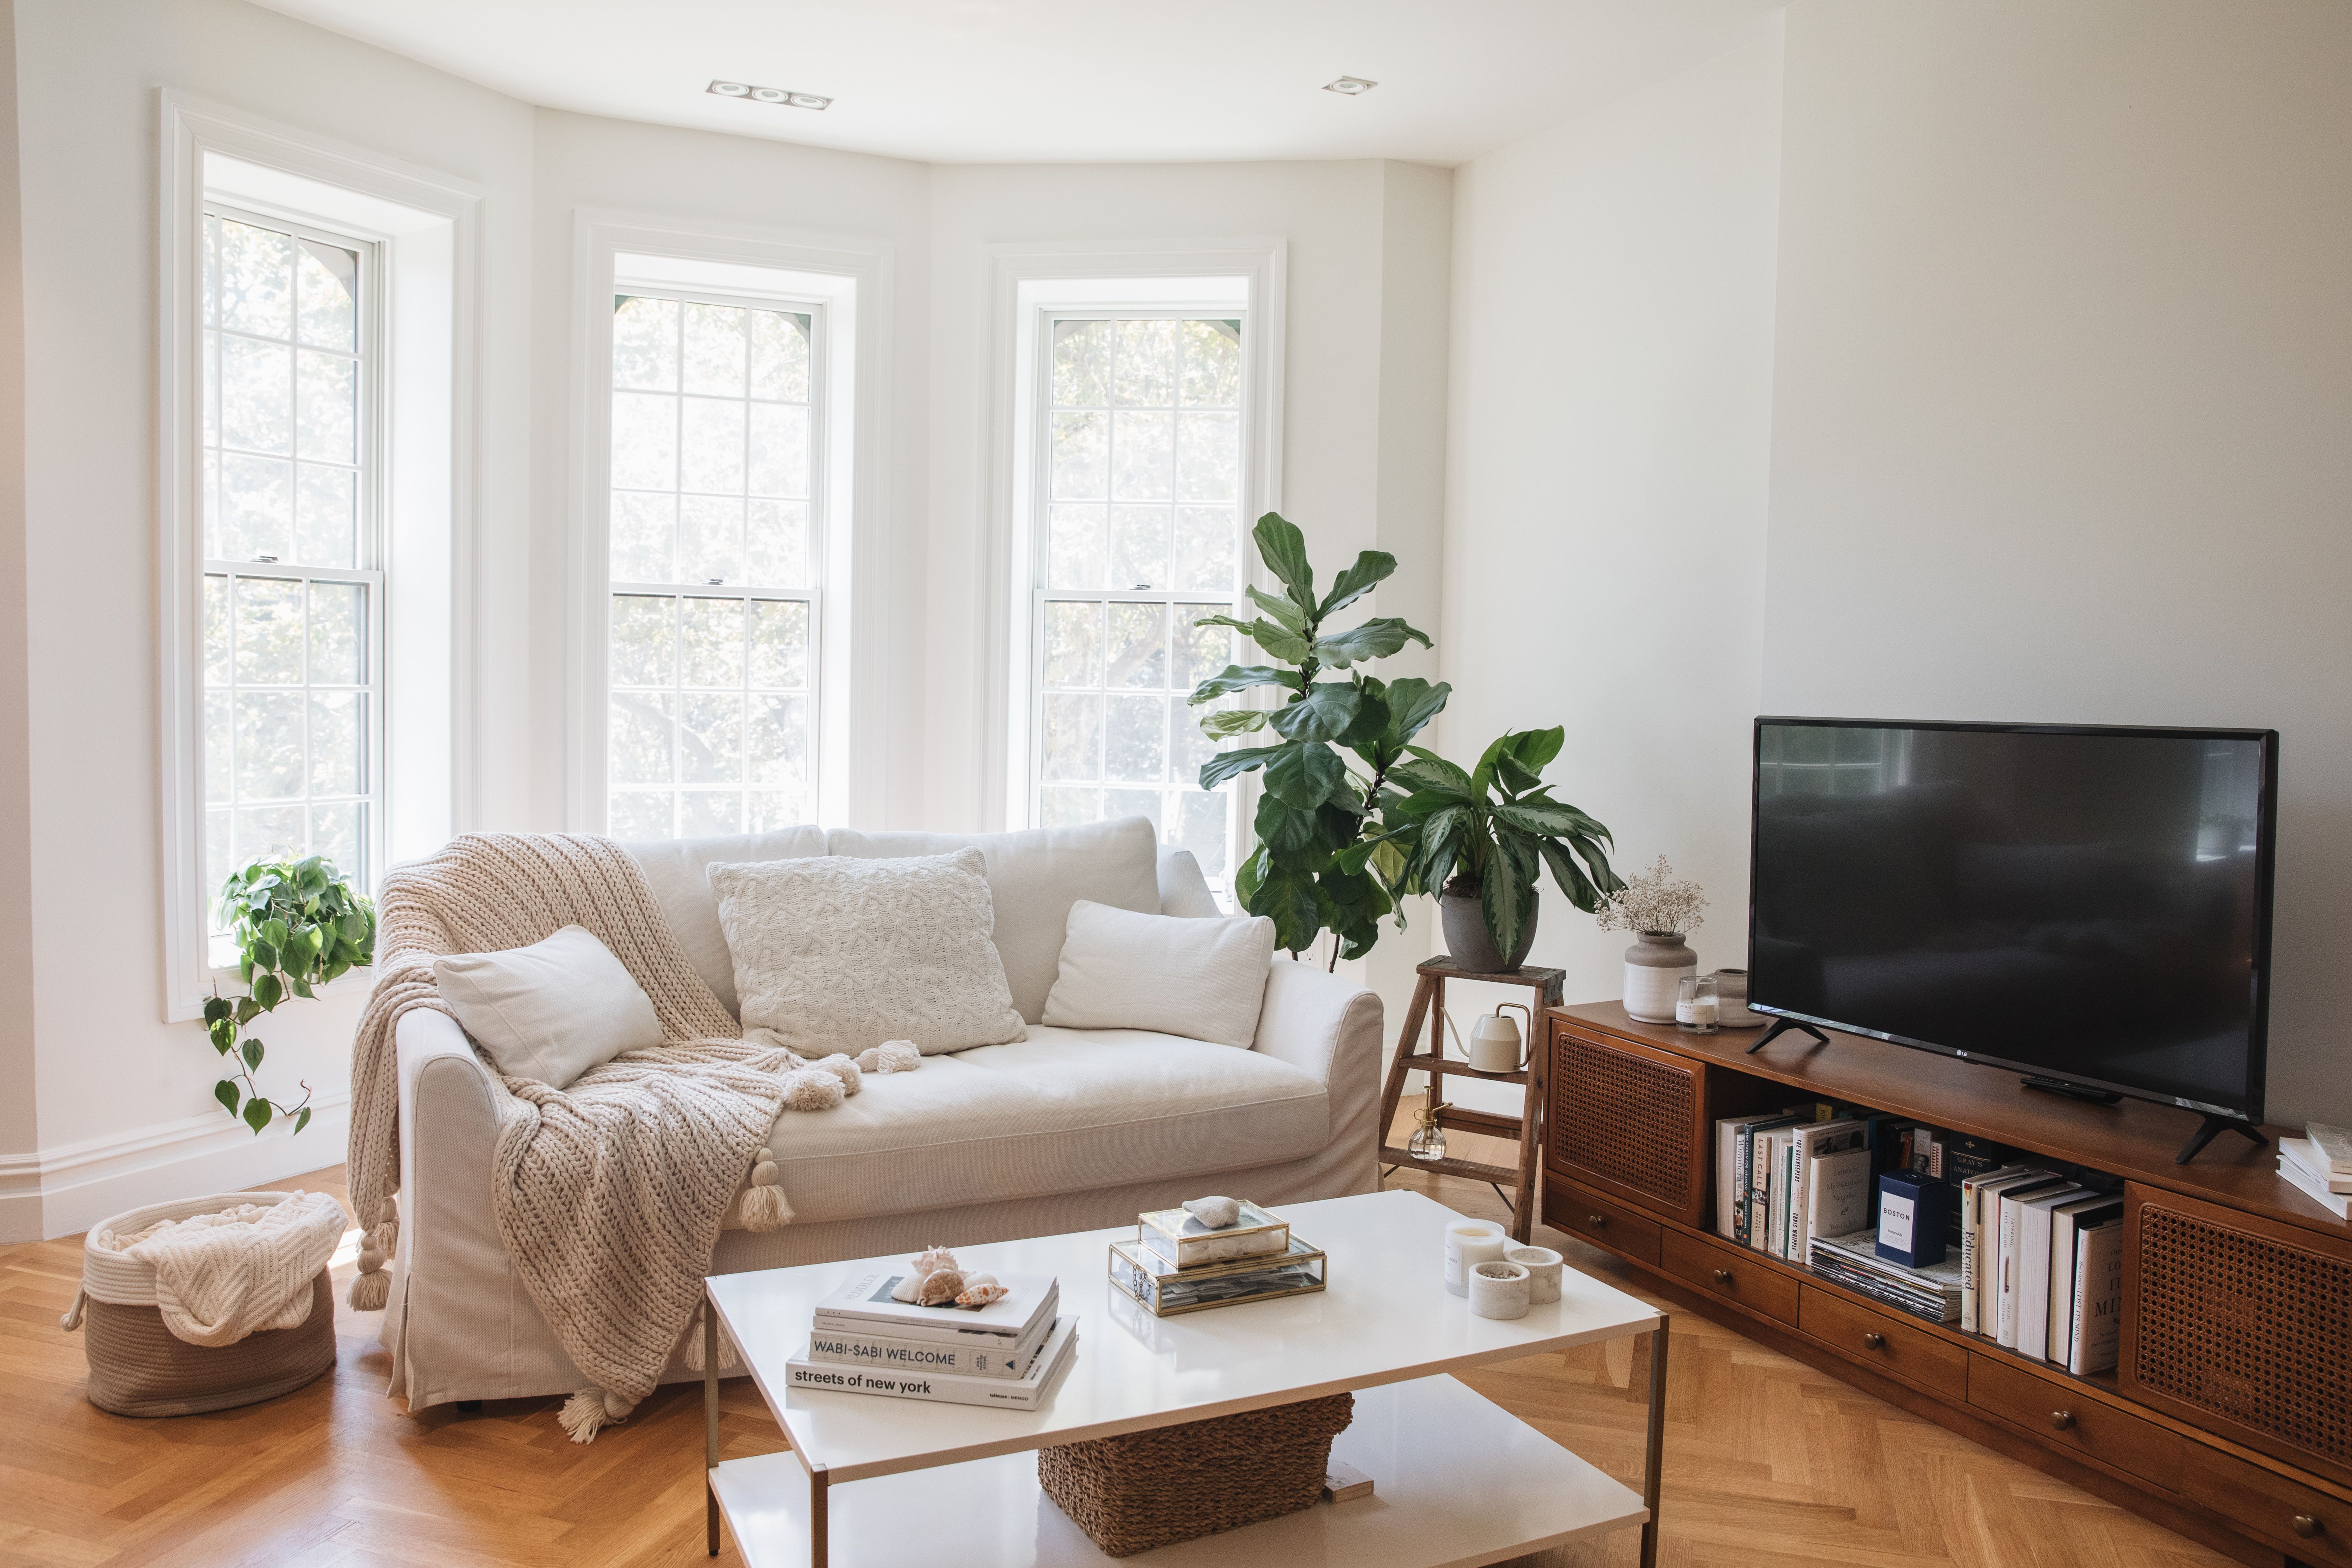 10 Simple Furniture Arranging Tips We Swear By